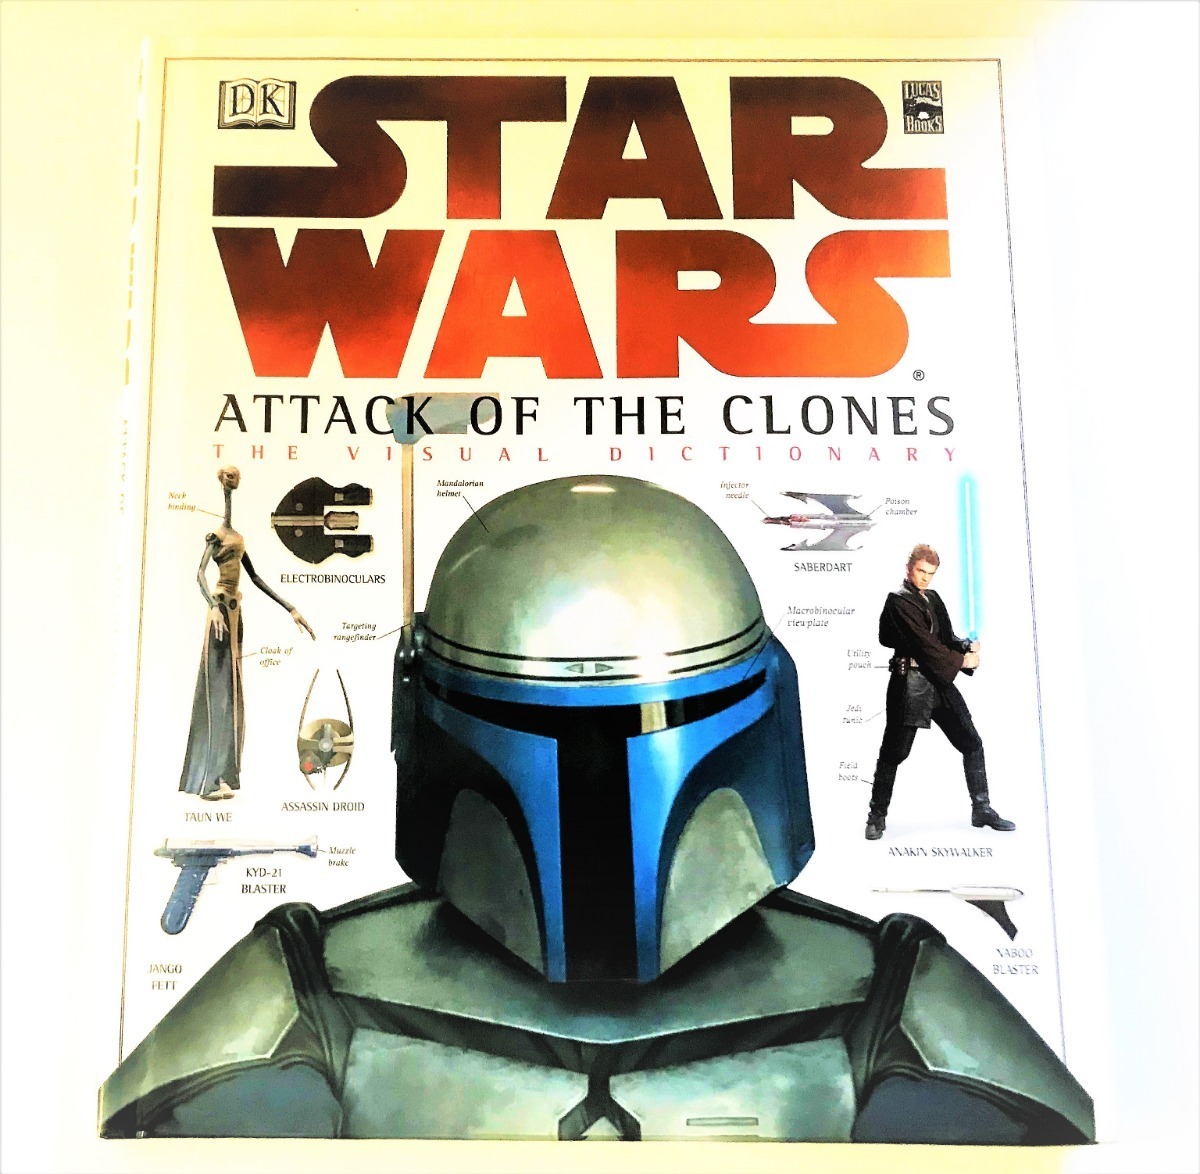 Star Wars: Attack of the Clones: The Visual Dictionary